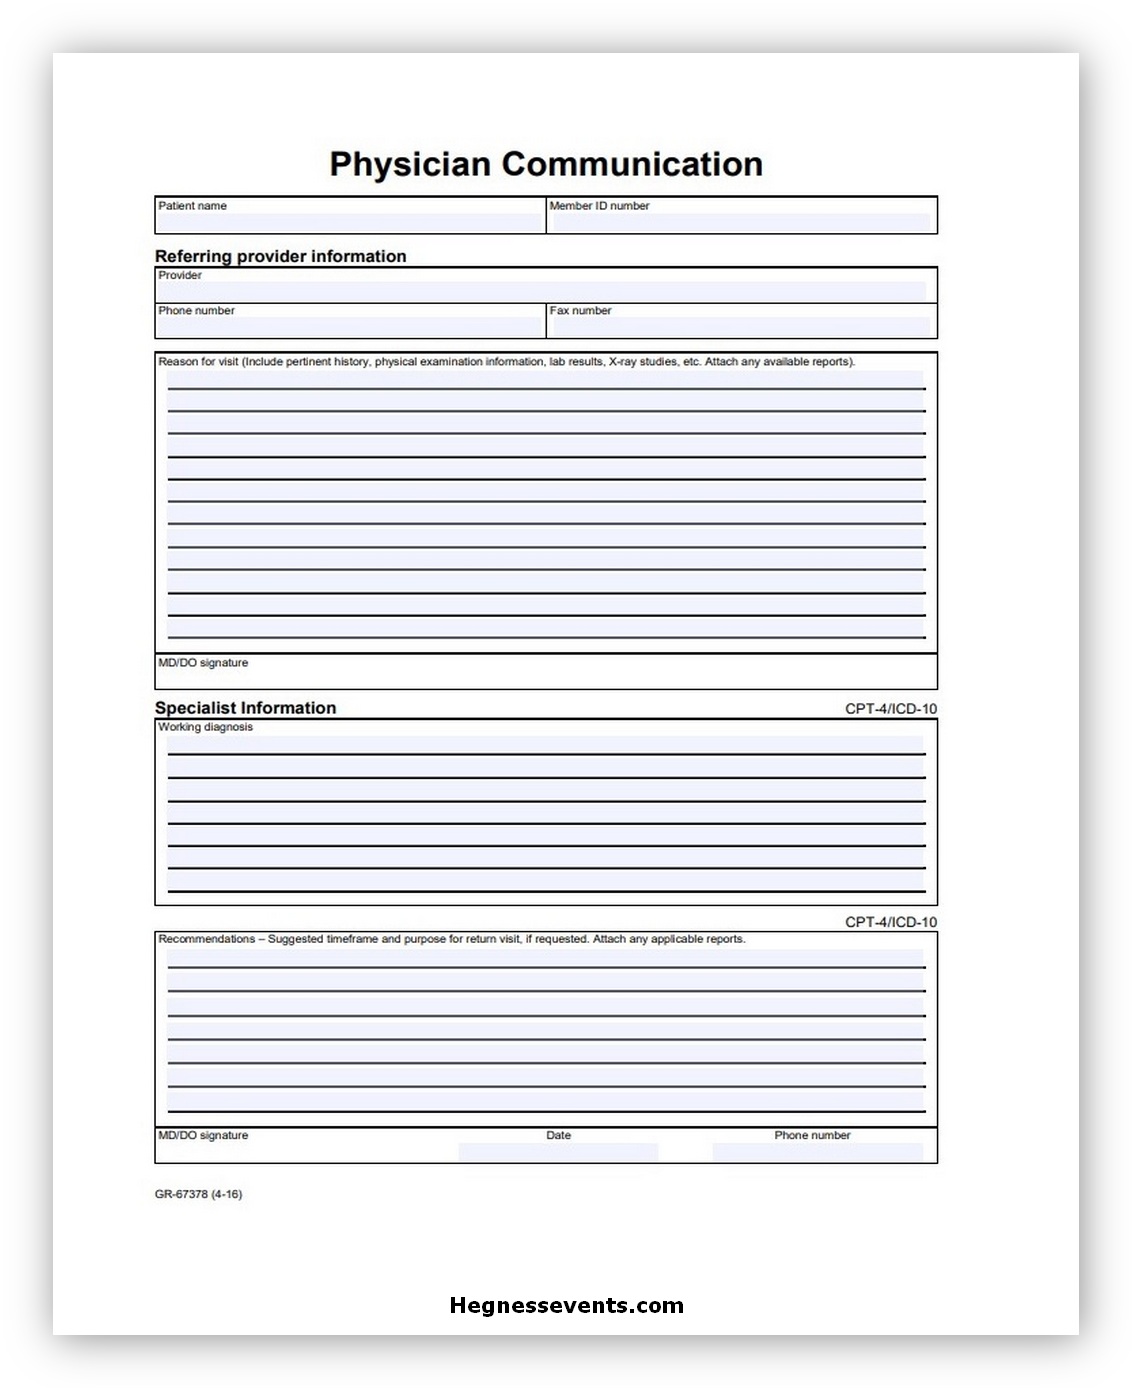 Physician Communication Form